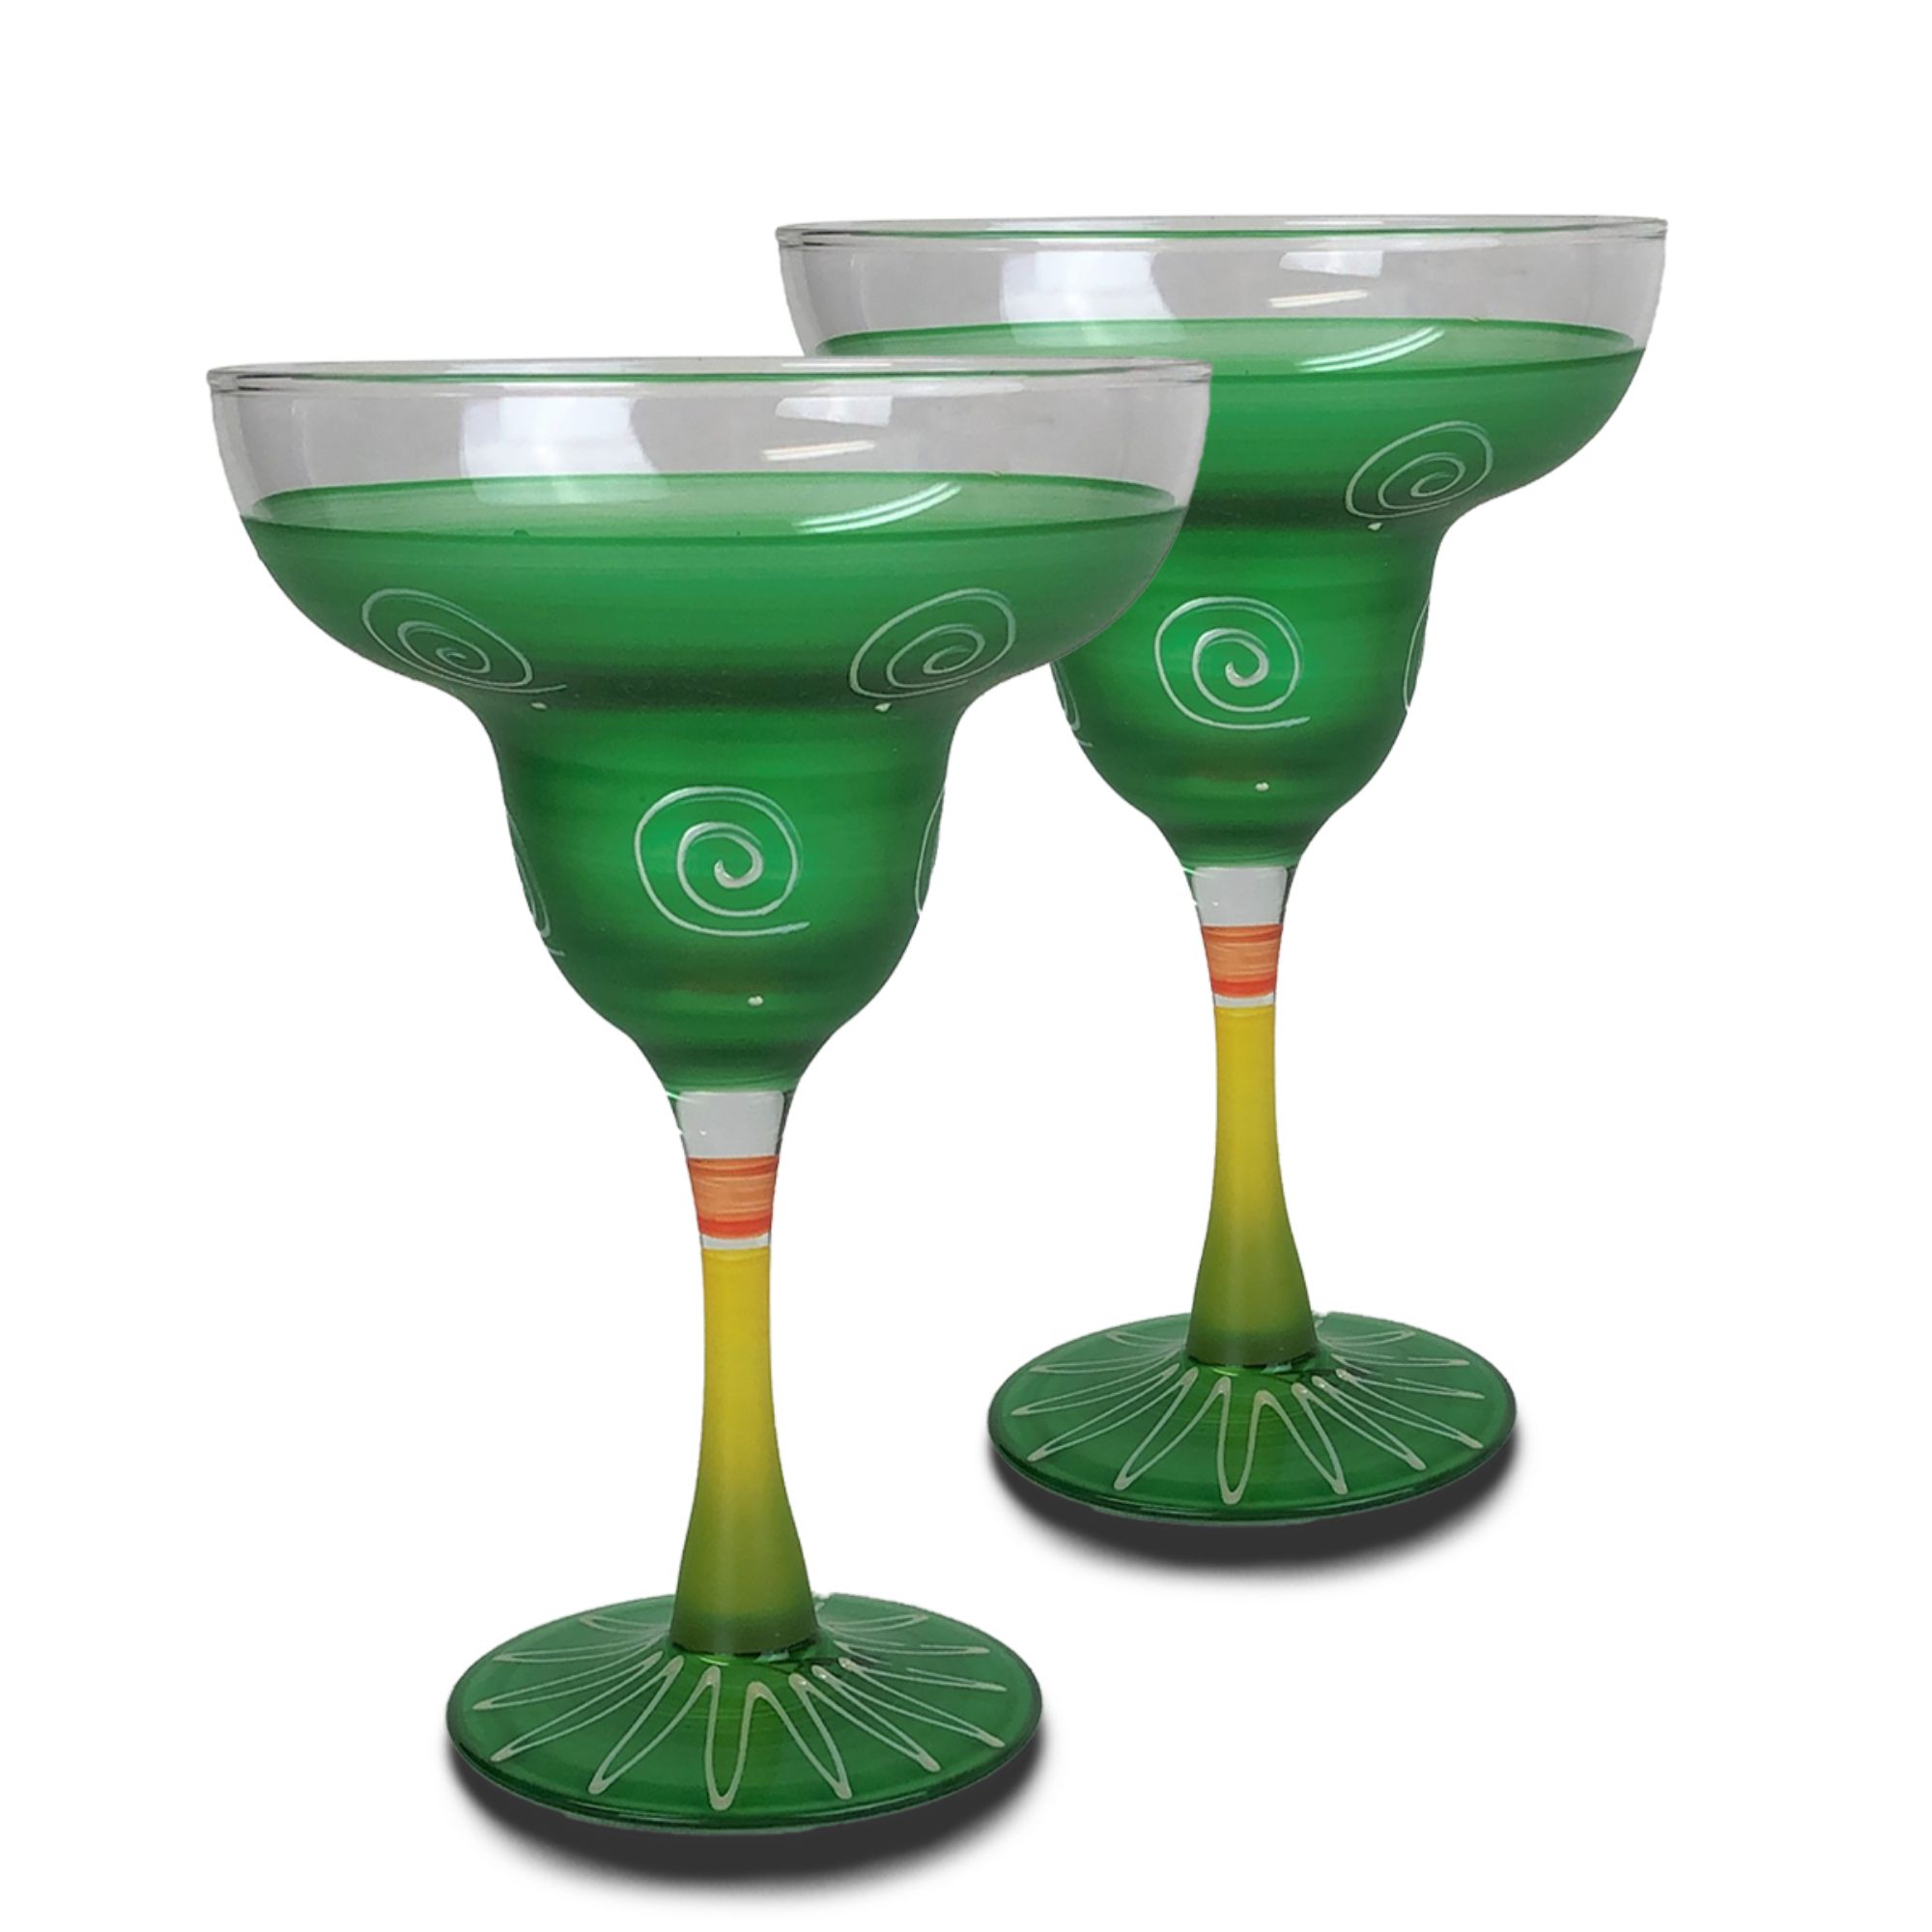 Golden Hill Studio Set of 2 Green and White Contemporary Hand Painted Wine Glasses 12 oz.